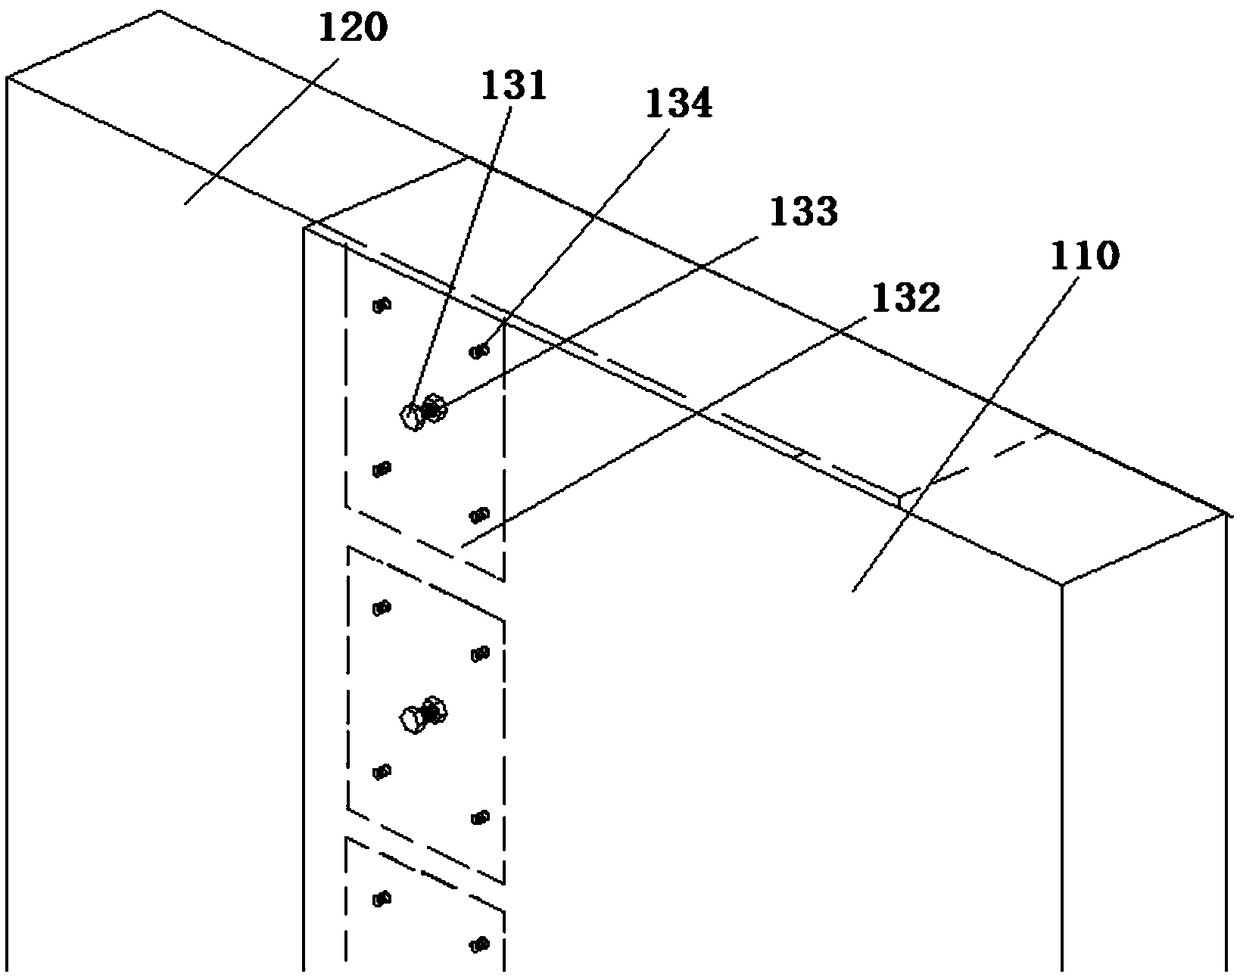 Disconnected-type plugging structure and method of wall beam on concrete-poured wall